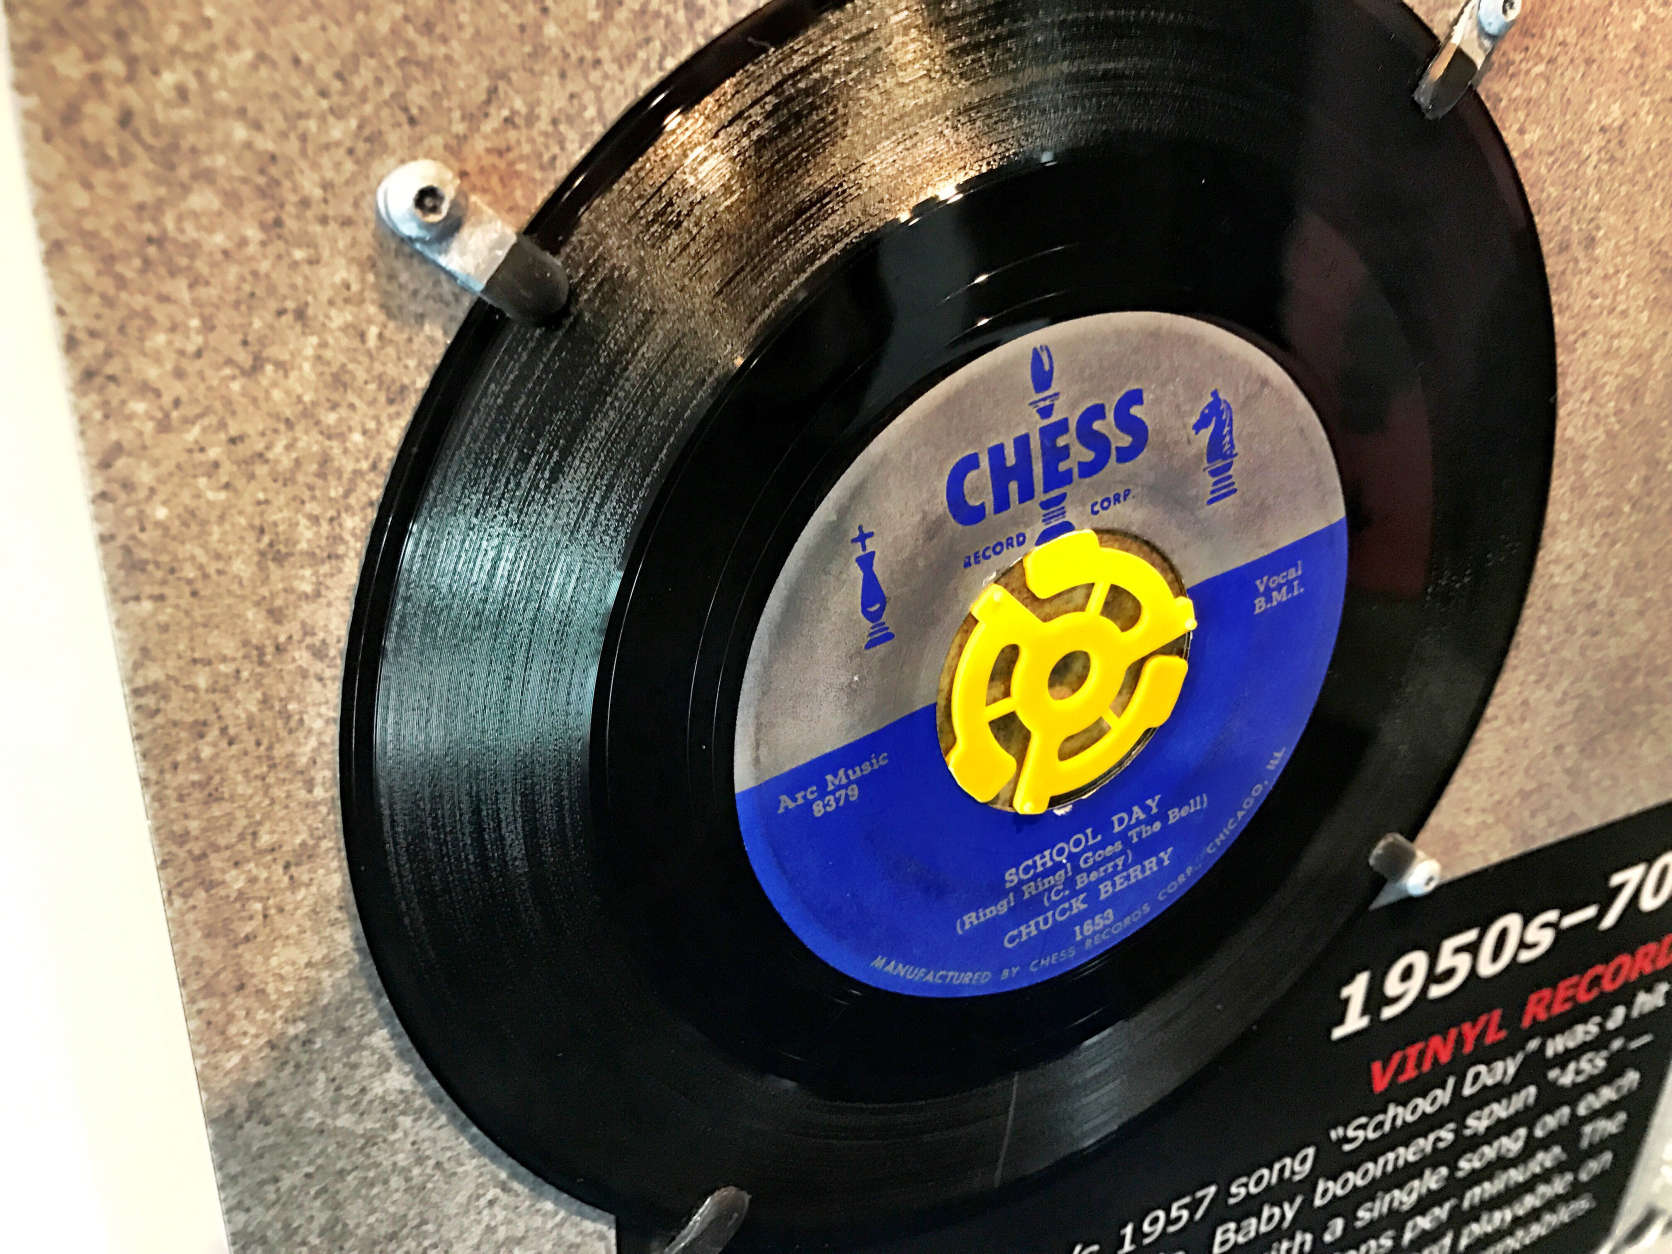 "Hail, hail rock and roll" -- Chuck Berry's 'School Days' 45 rpm record on display. From the 1950s through the 1970s, singles offered an inexpensive way for young people to own music. (WTOP/Neal Augenstein)